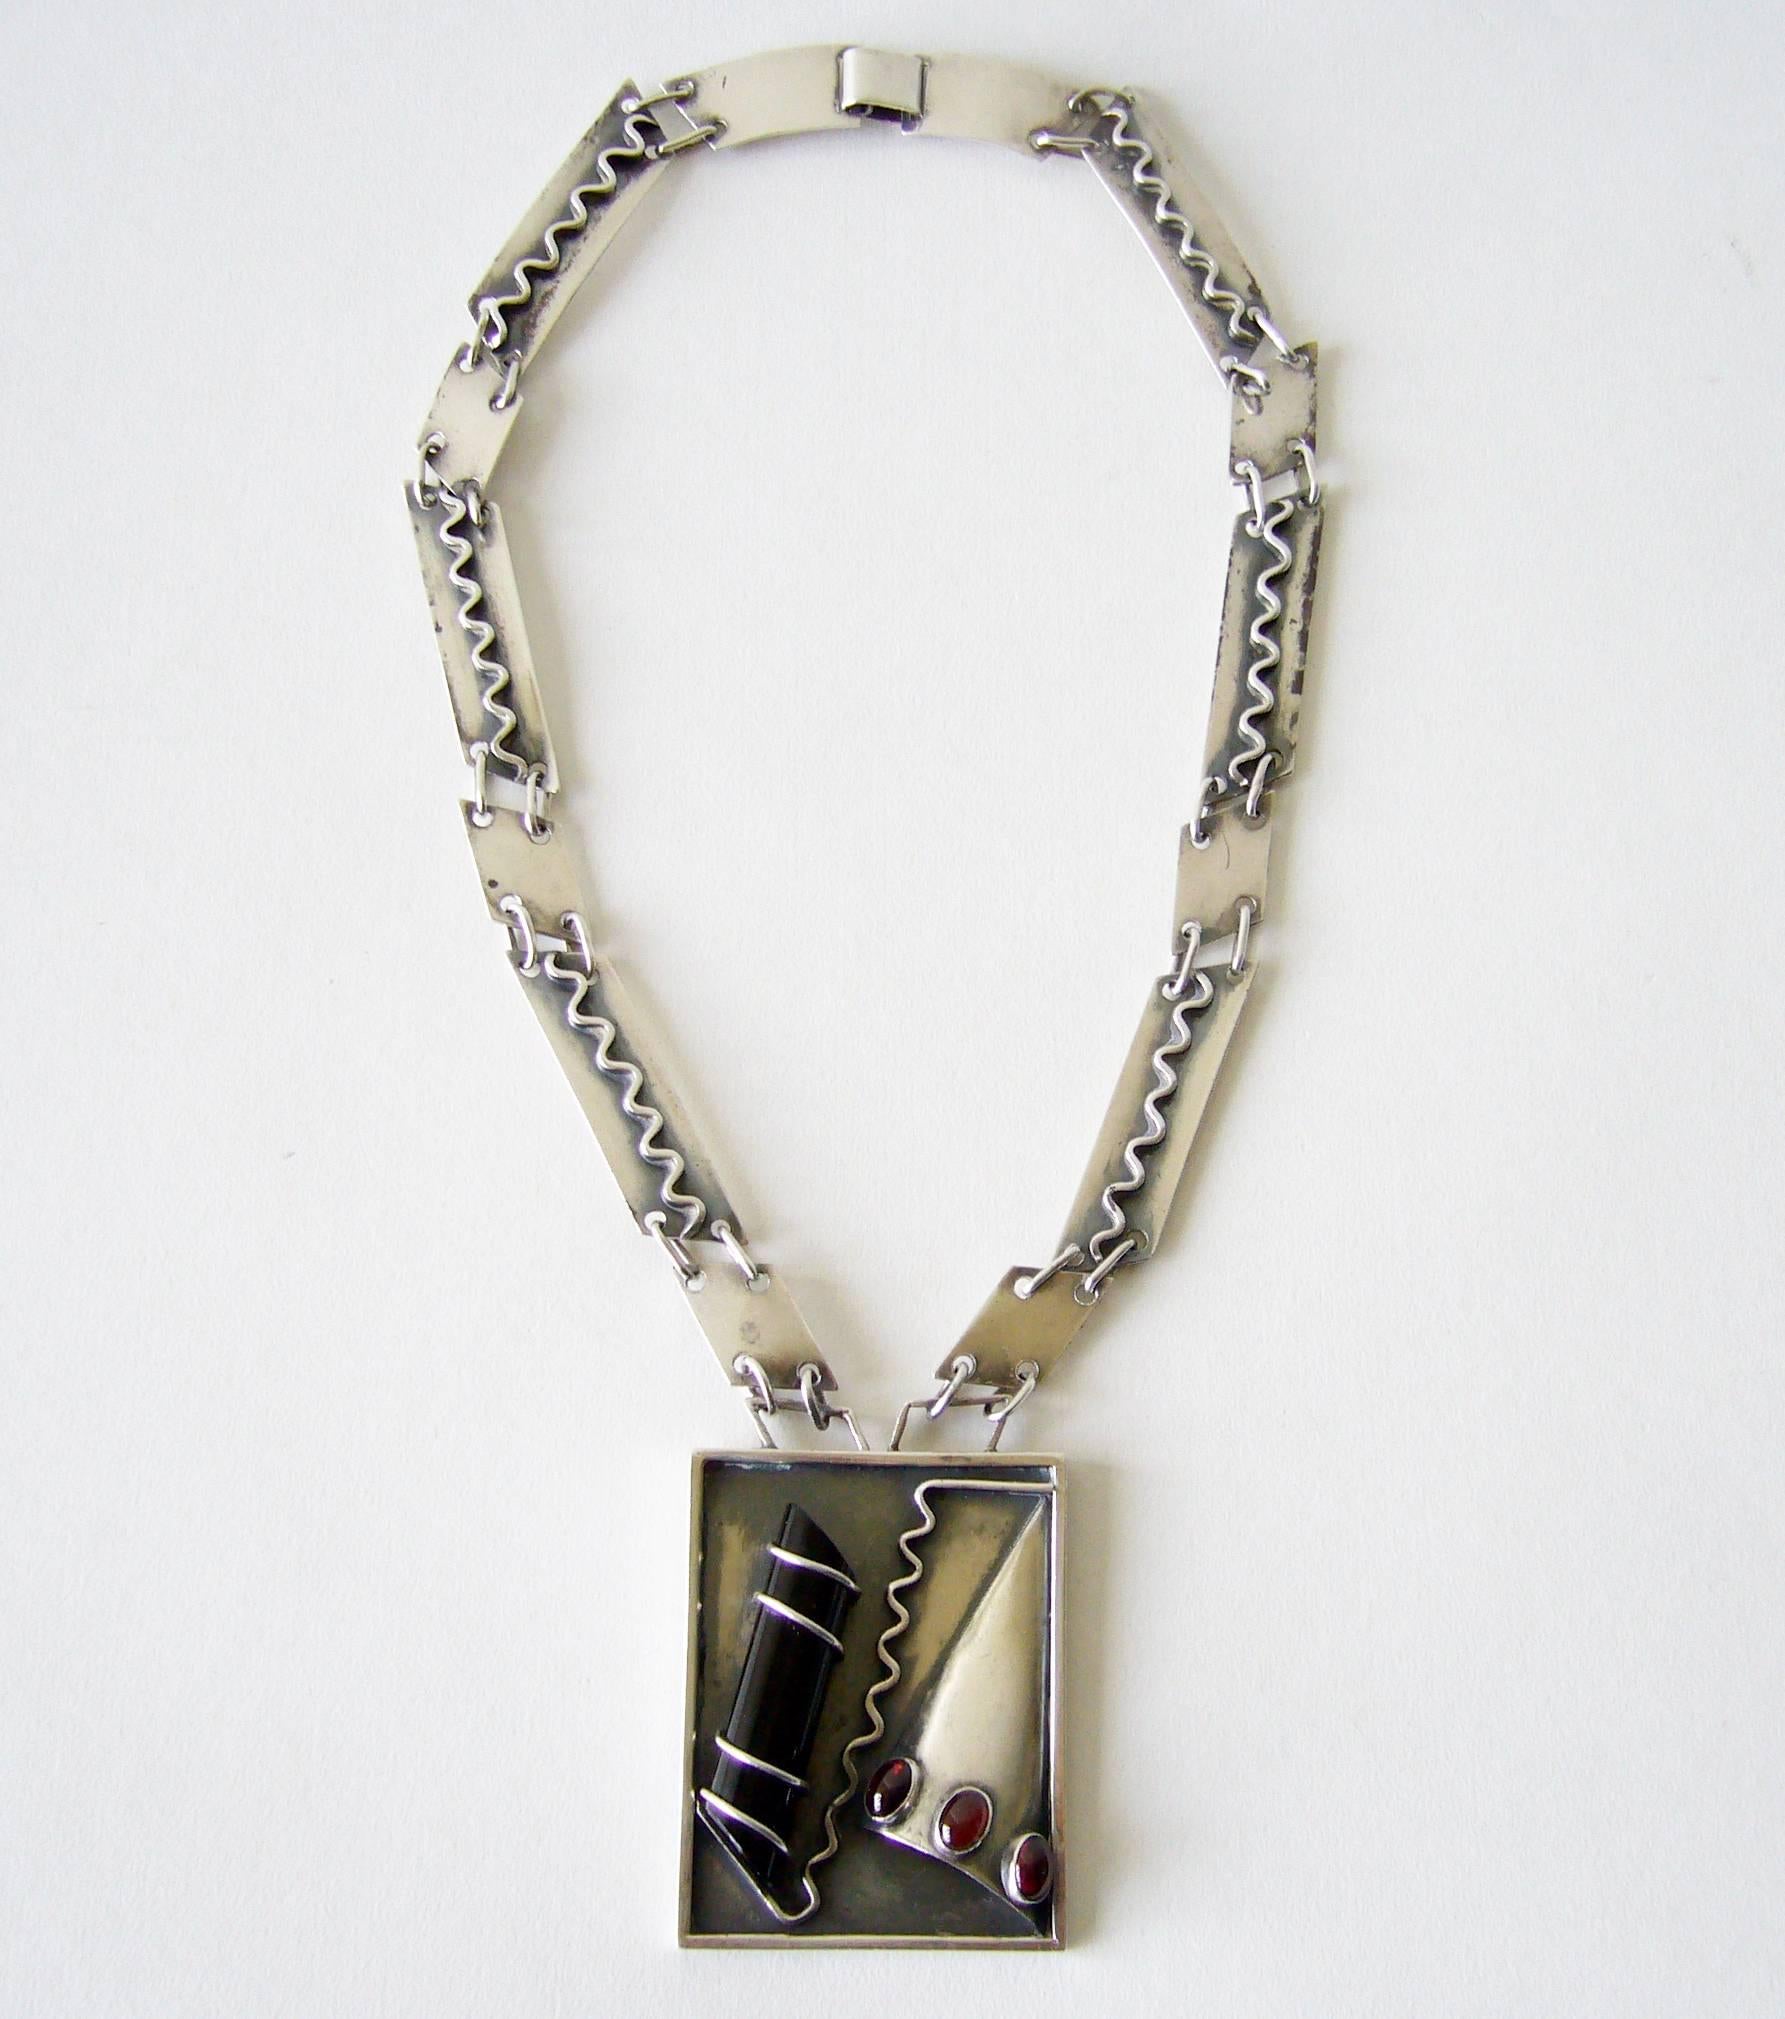 Rare, one of a kind sterling silver, onyx and amber or garnet surrealist necklace created by Idella La Vista of New York City, New York.  Necklace features a large piece of onyx threaded on to a sterling plaque along with other pieces of hand forged